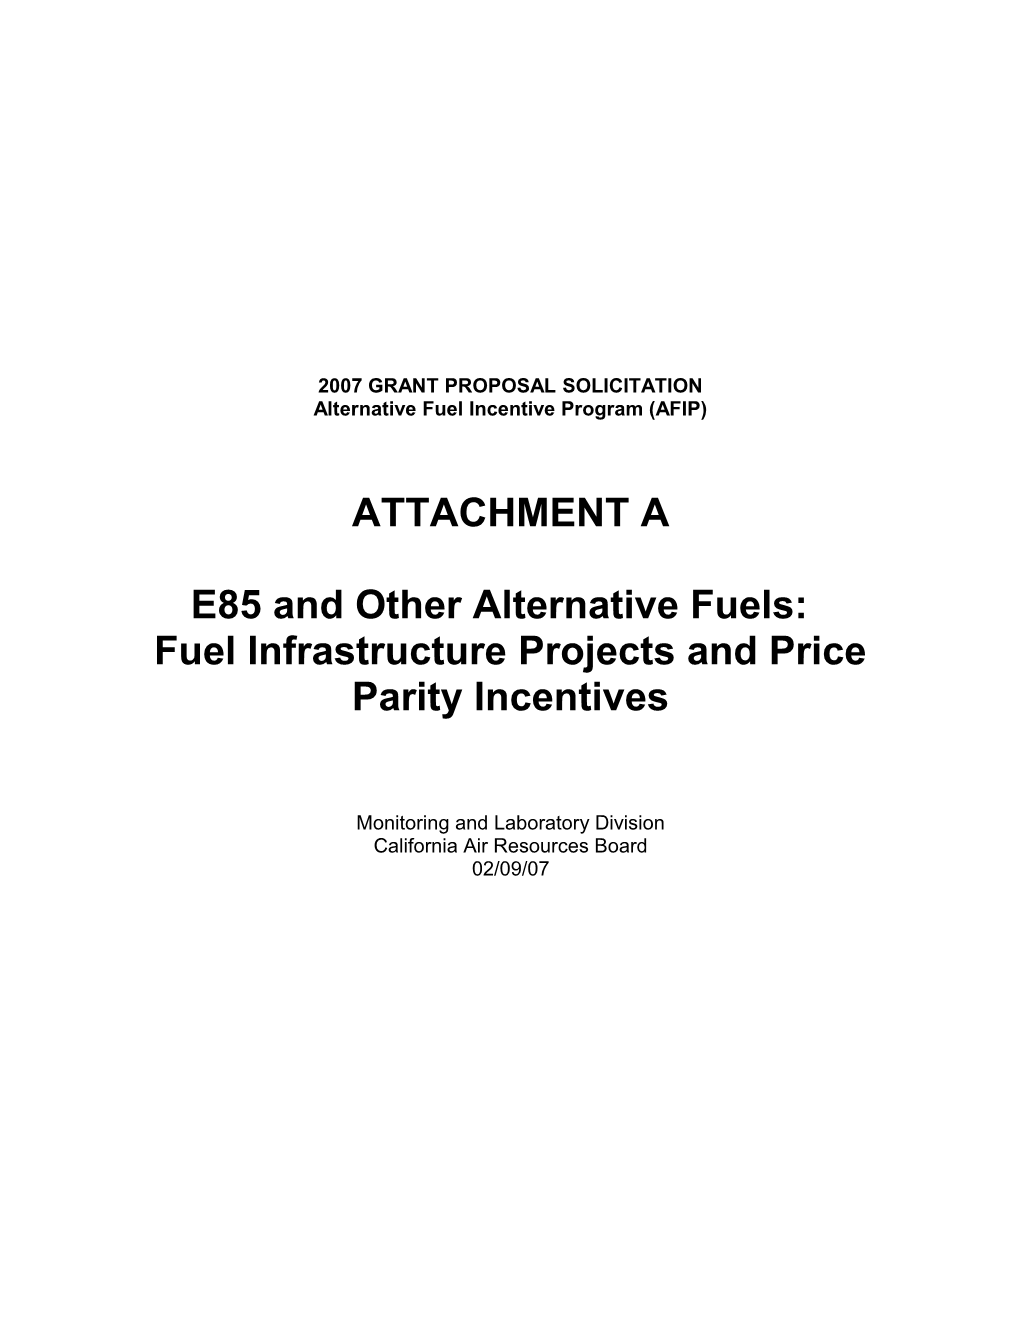 Fuel Infrastructure Projects and Price Parity Incentives